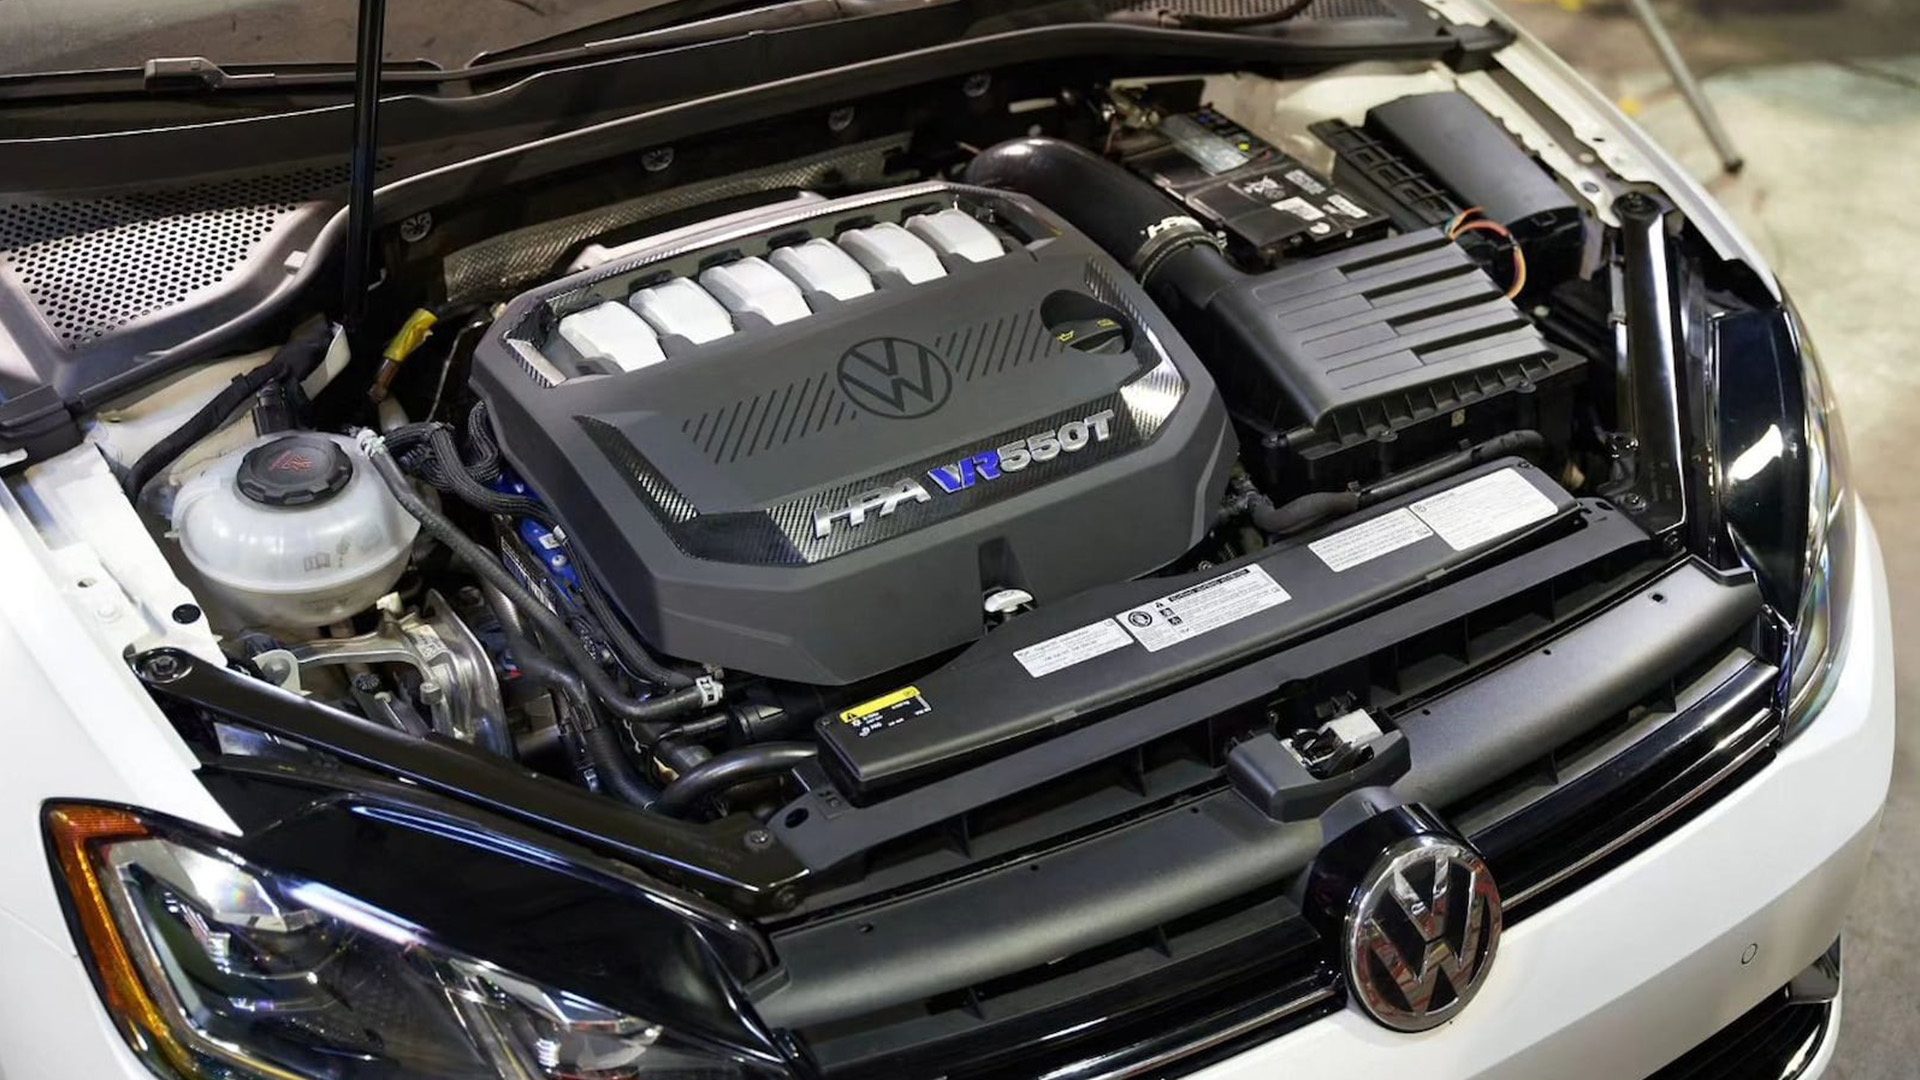 VW Tuner Is Building Turbo VR6-Swapped Mk7.5 Golf Rs With 550 HP